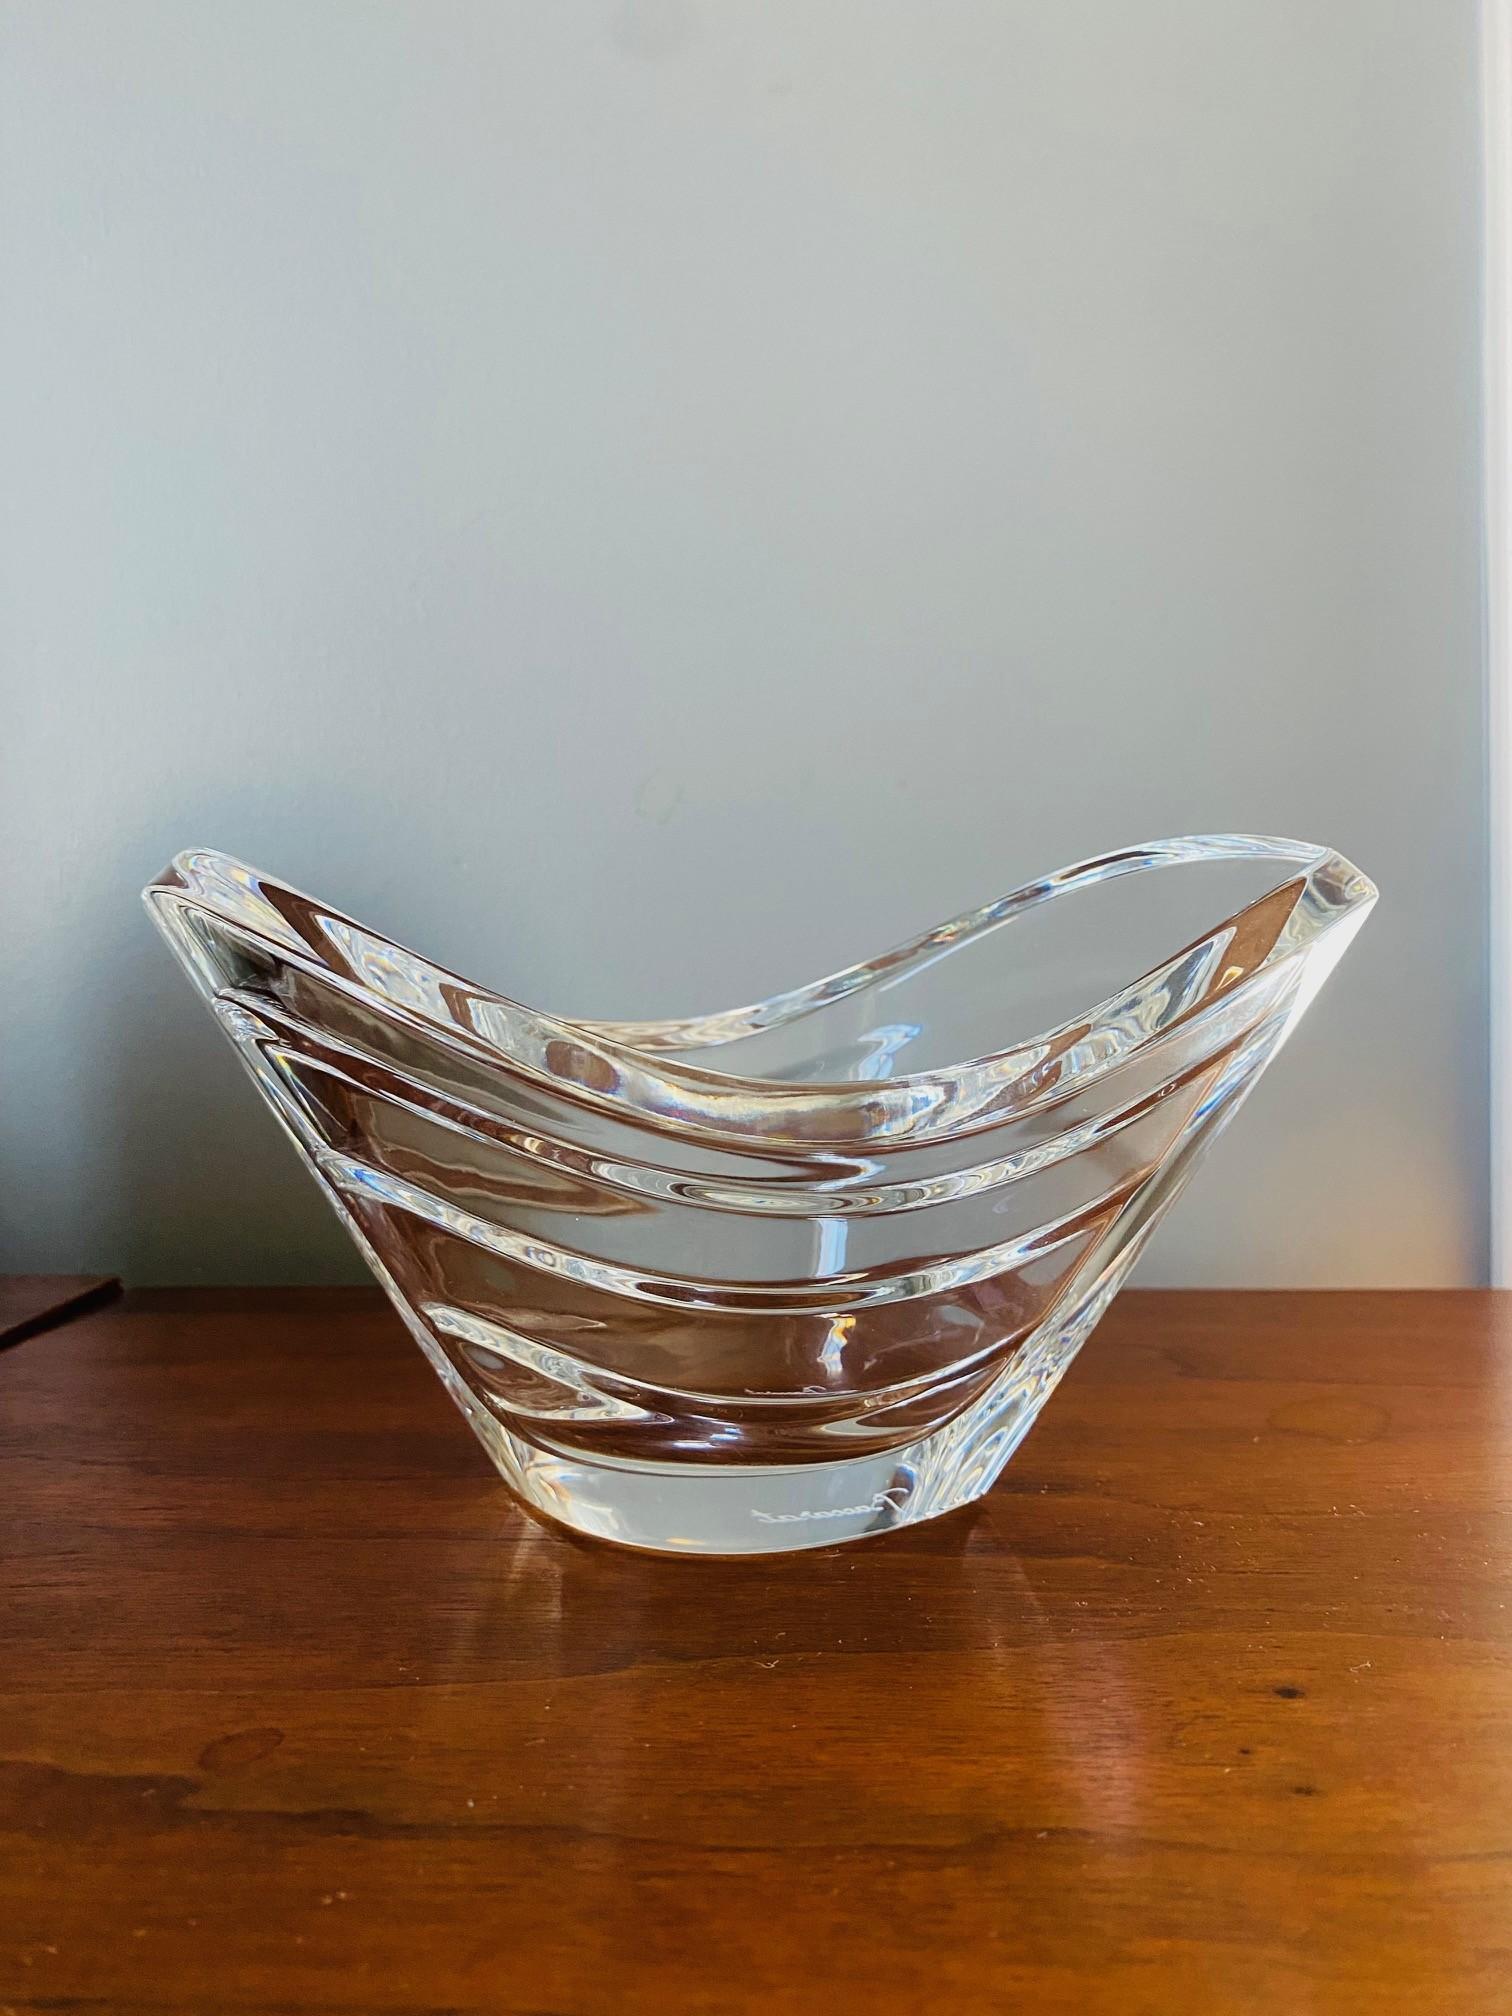 Luxurious bowl from crystal-sculpting experts Baccarat.  With its legacy in crystal, Baccarat displays craftmanship and beauty in its unique pieces.
The edge of the vase undulates throughout clear crystal with waves traveling down the side in five